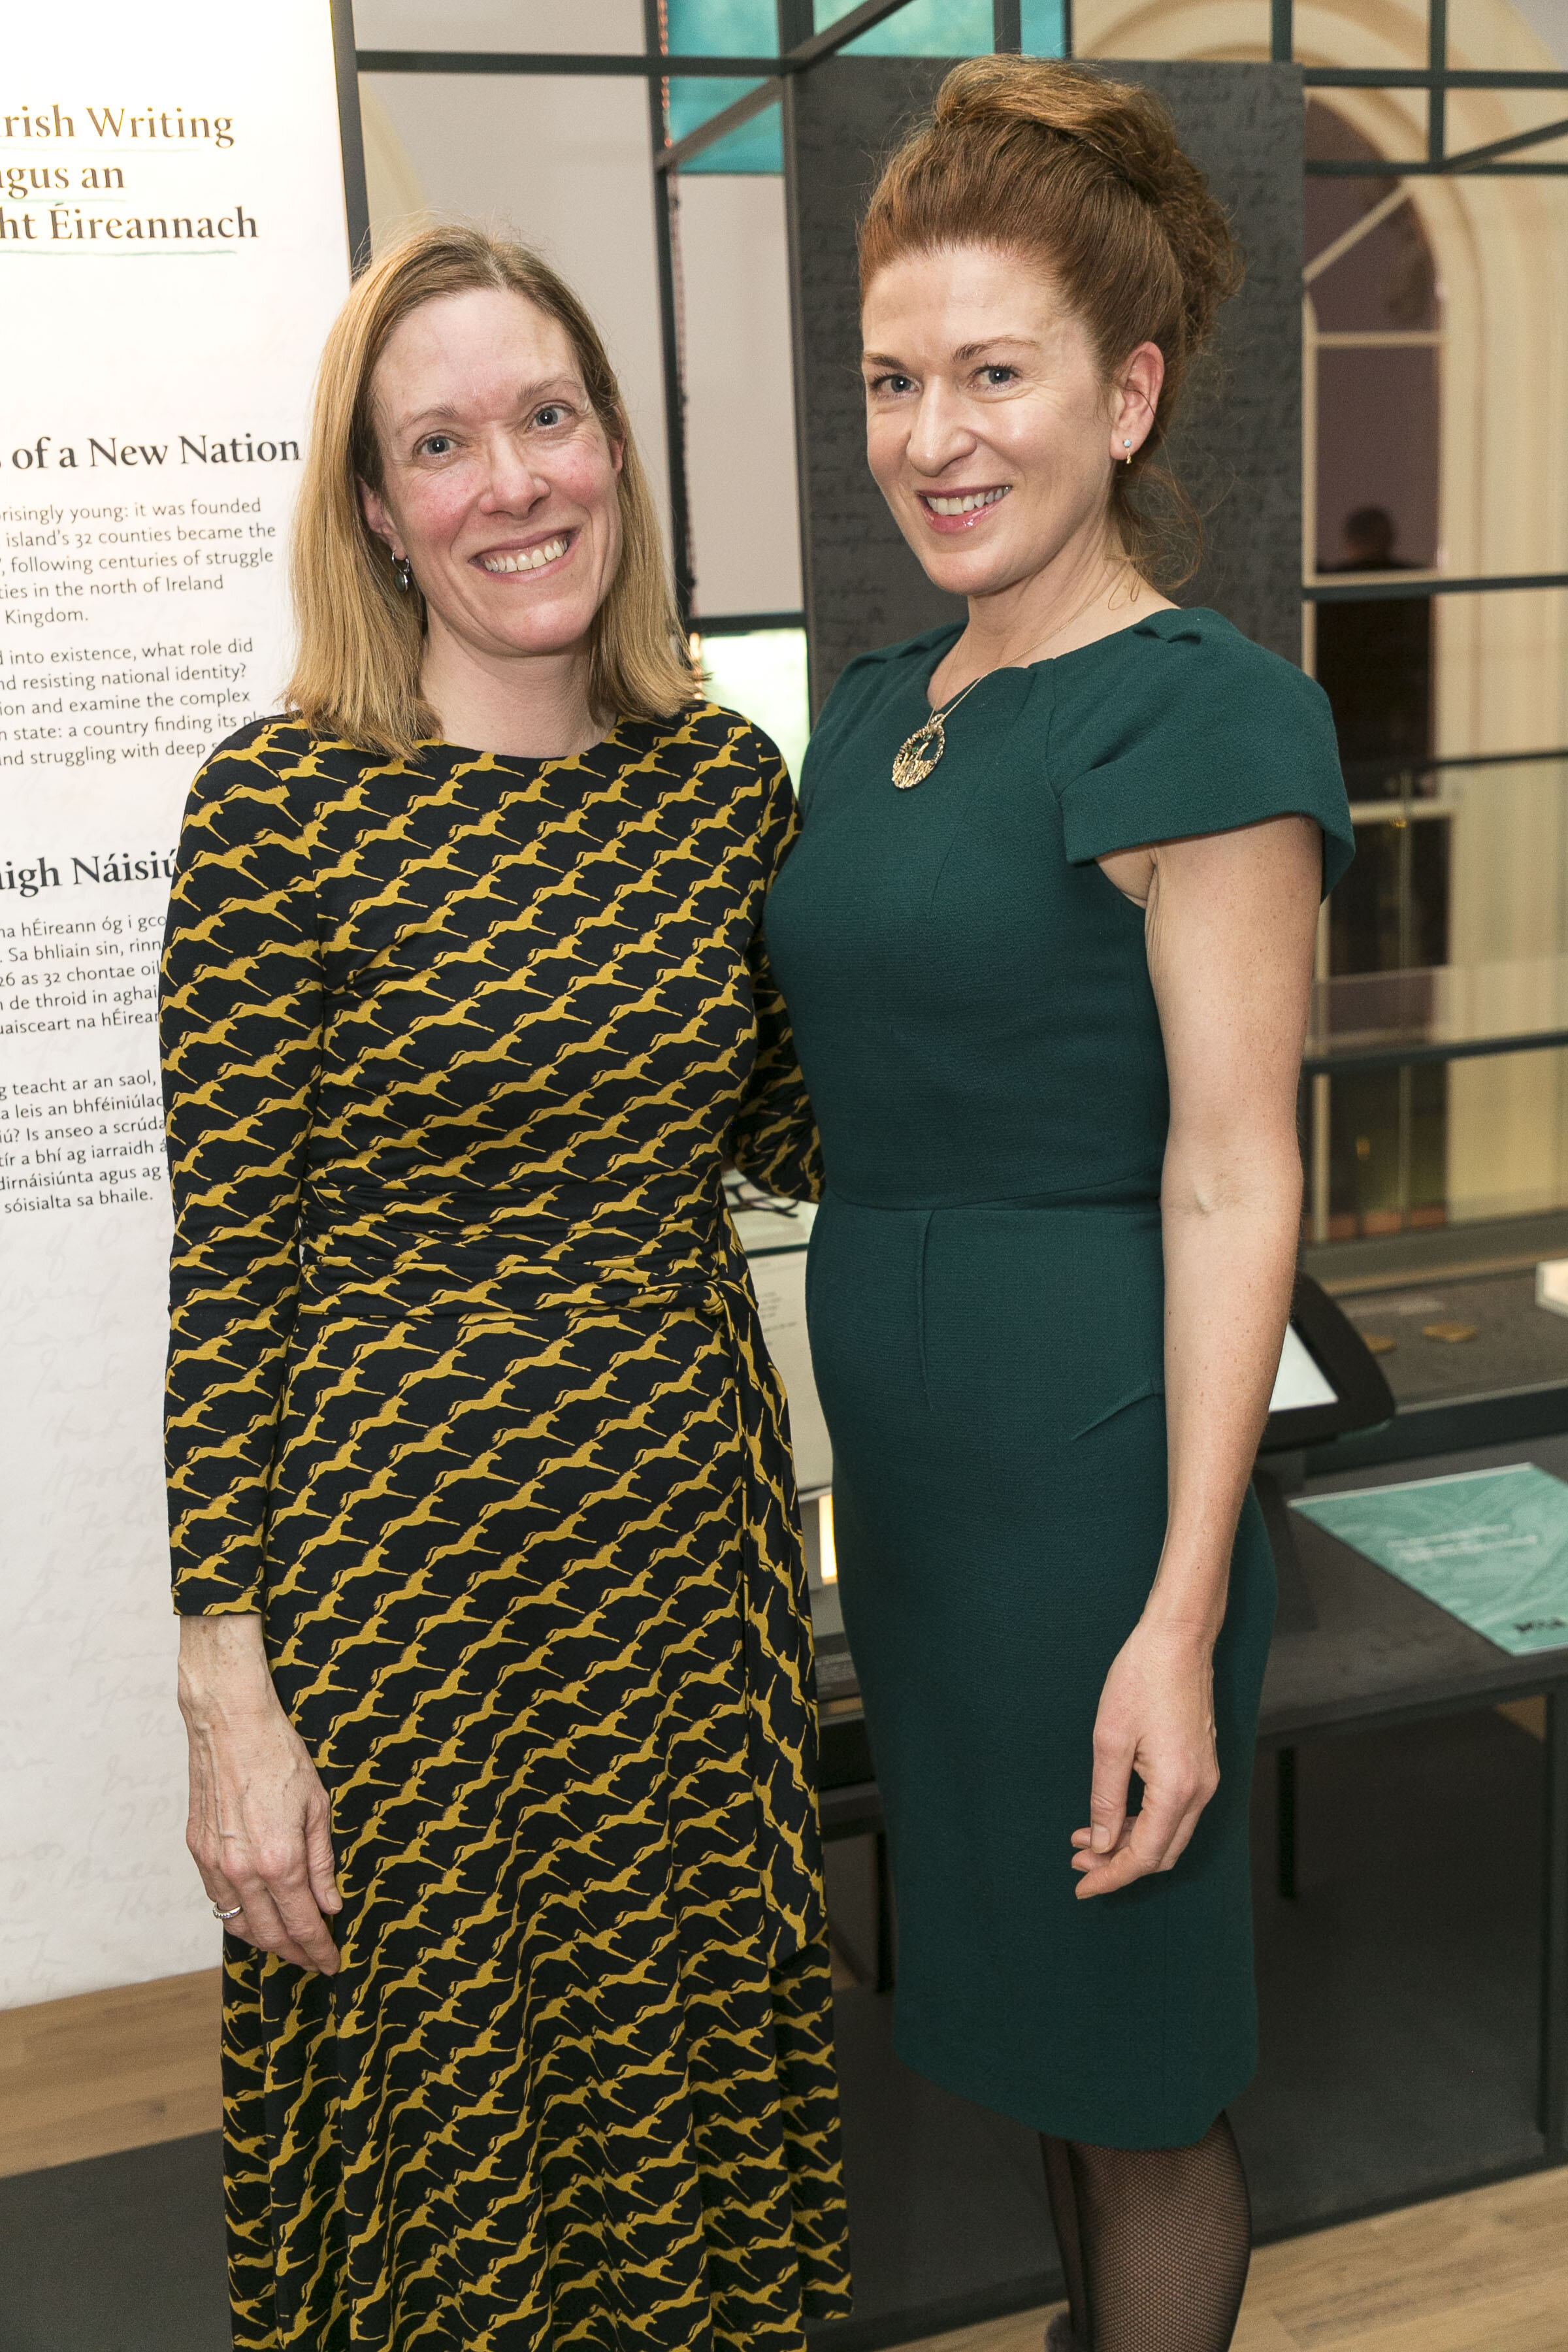  Sinead Monks, Sinead Fitzgerald   Hamilton Gallery / MoLi / DFAT - exhibition opening by Sabina Higgins of "Eva Gore-Booth 93 Irish women artists respond to her life and work", part of Brigids Day Lá Fhéile Bríde, Celebrating Women and Creativity.  